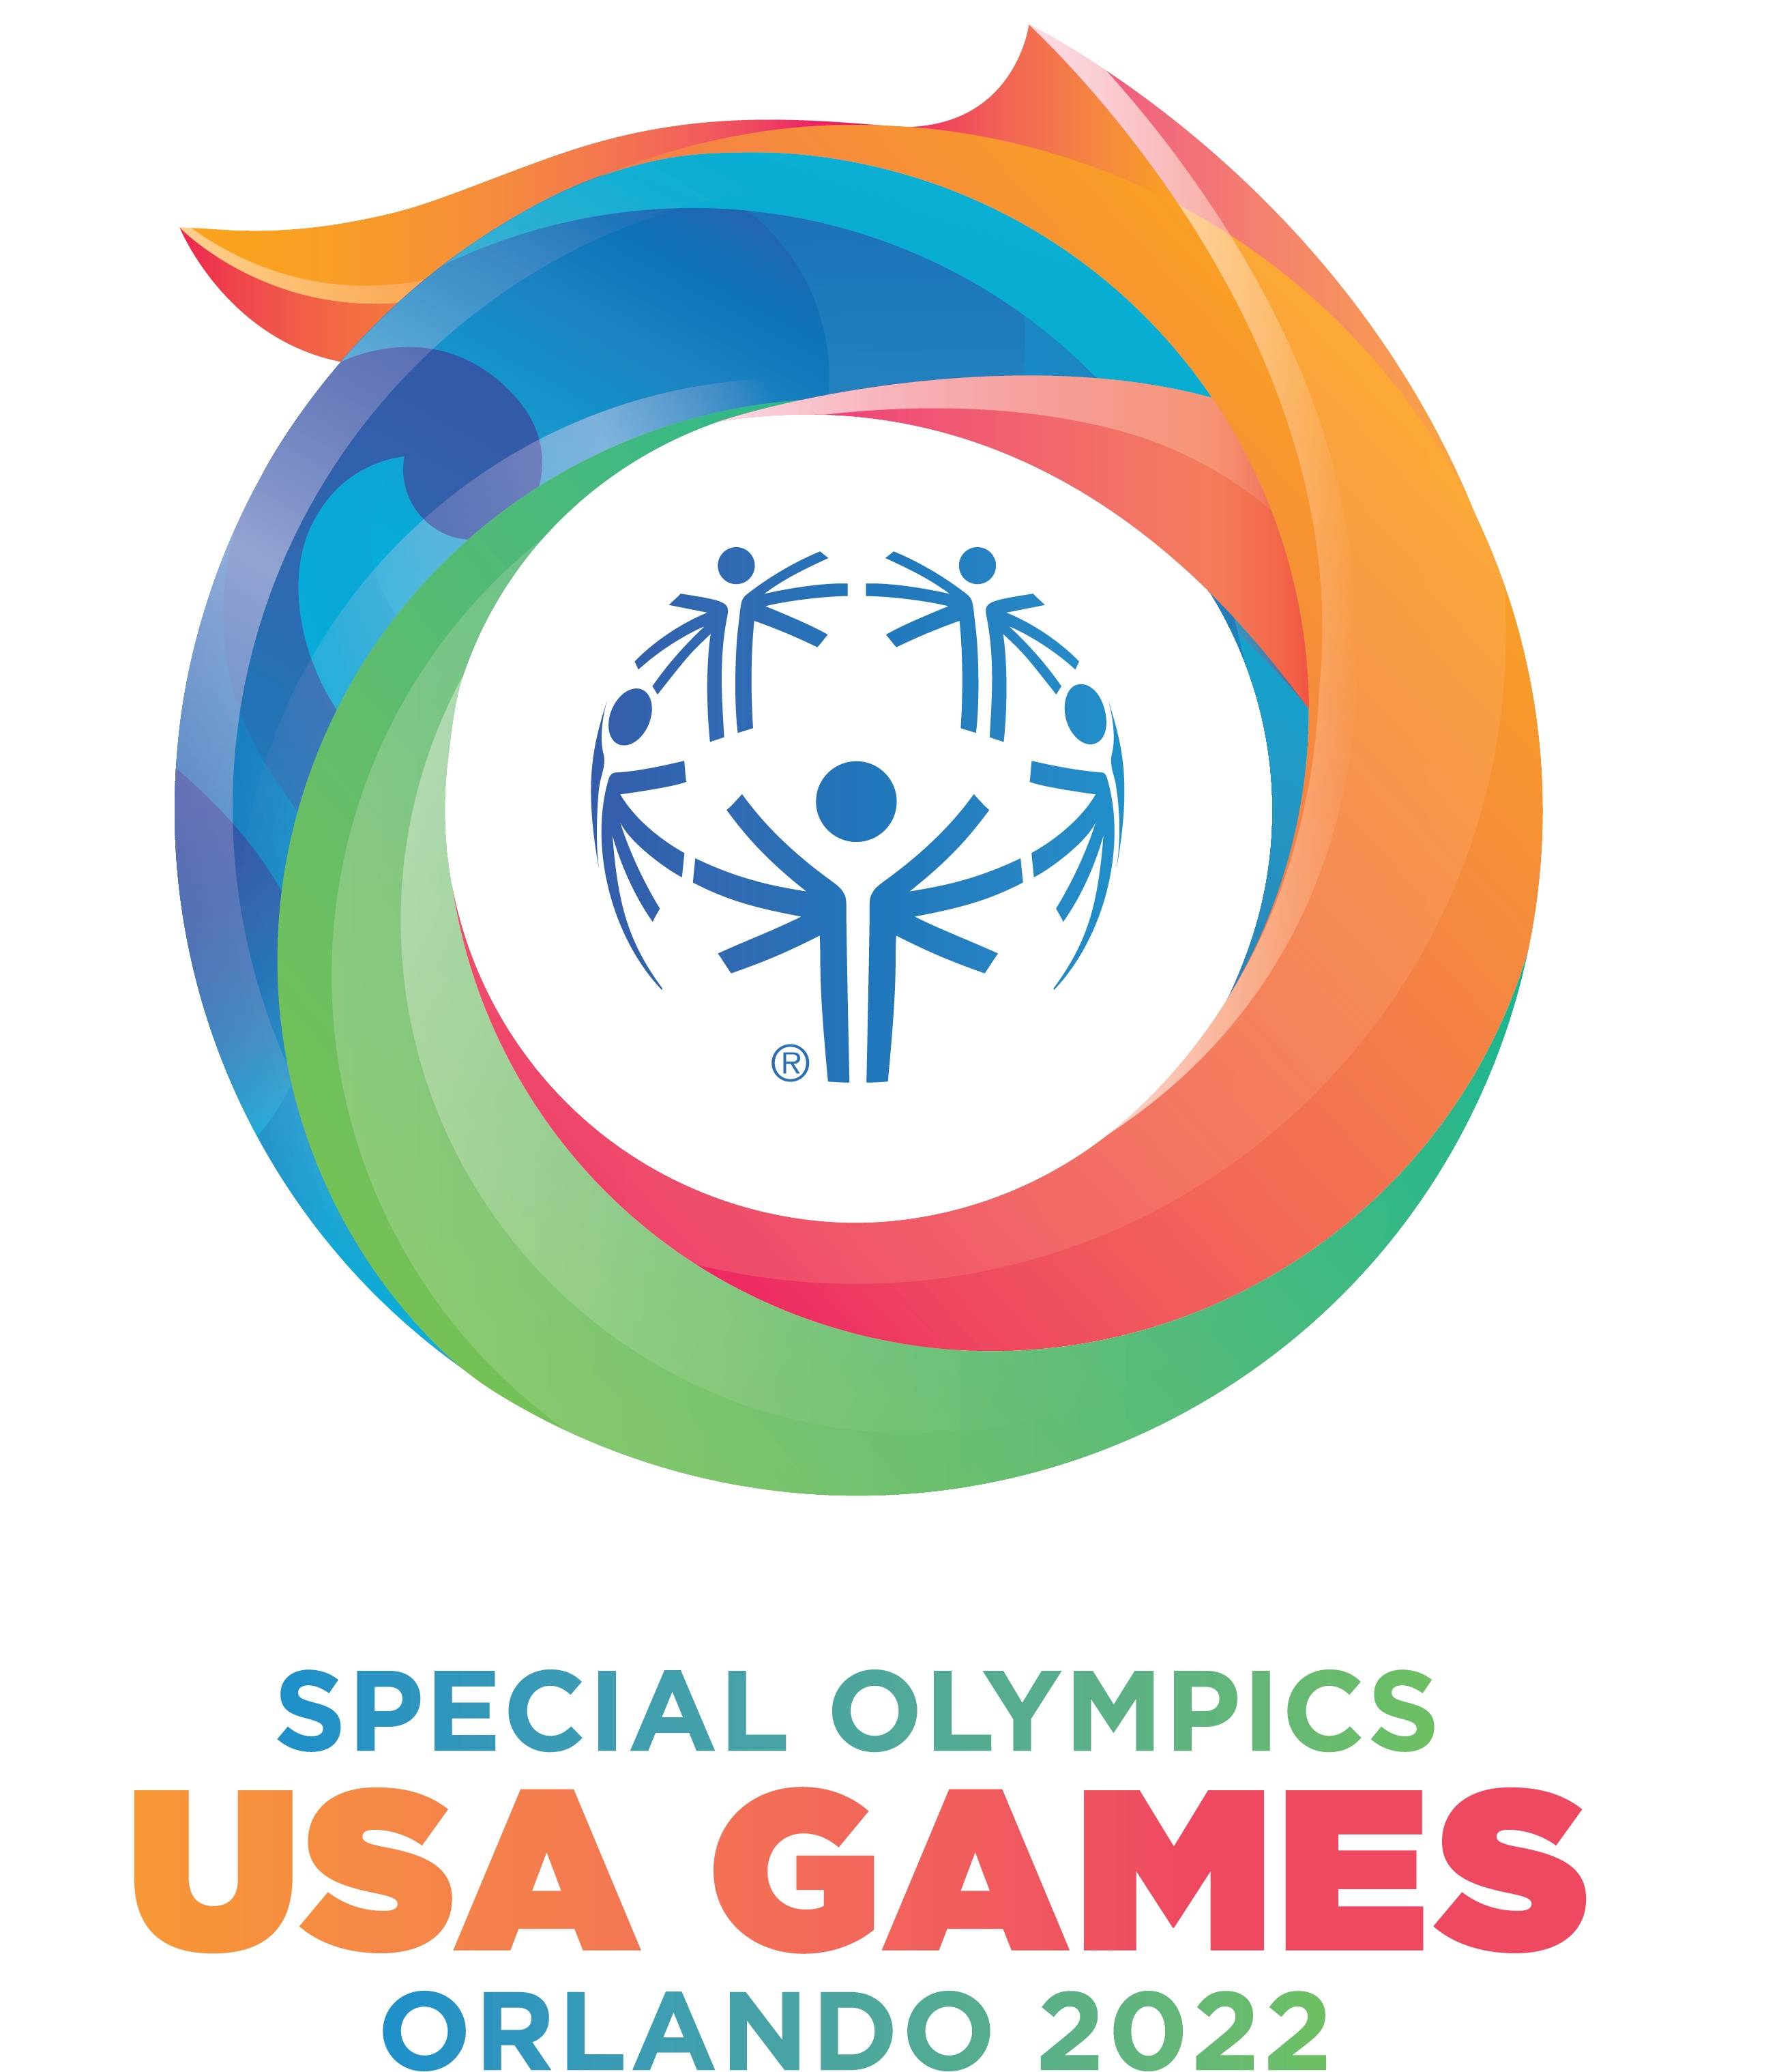 Tickets now on sale for the 2022 Special Olympics USA Games Opening Ceremony presented by Disney Live Entertainment